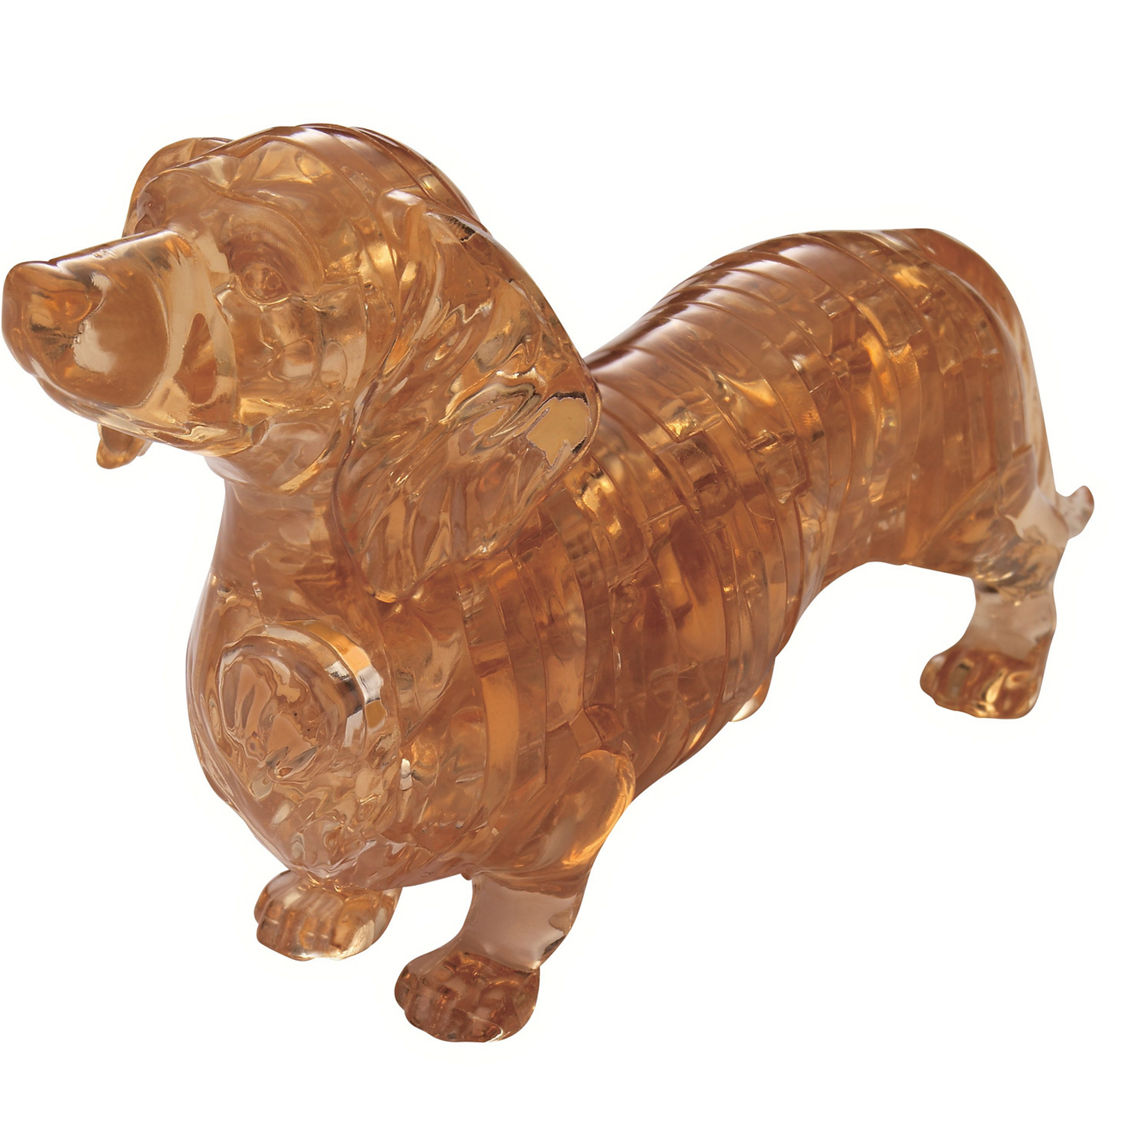 BePuzzled 3D Crystal Puzzle - Dachshund: 41 Pcs - Image 2 of 2